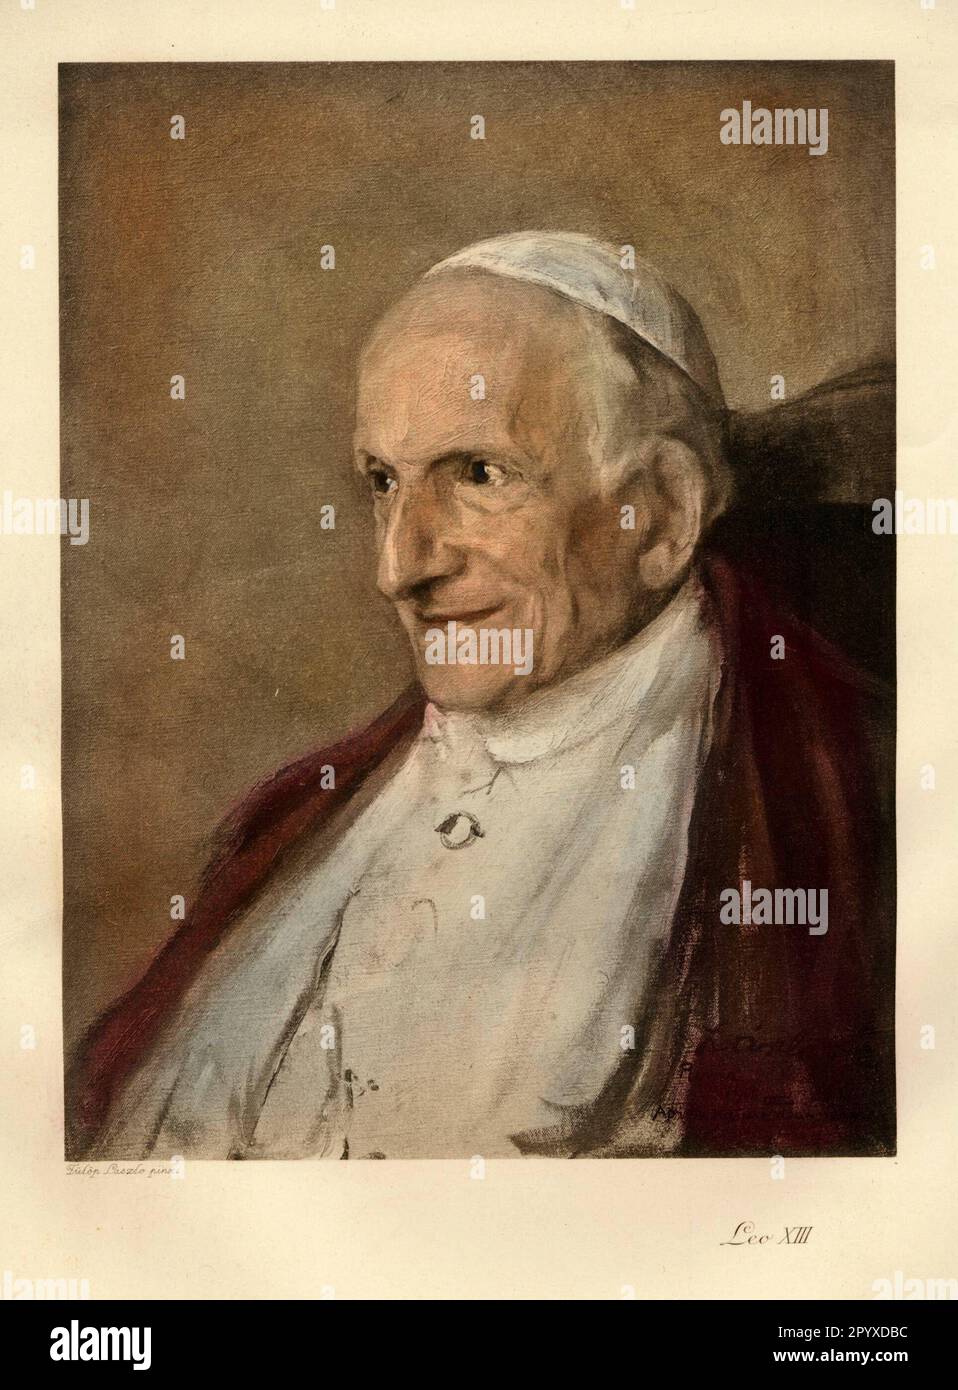 Pope Leo XIII (real name: Vincenzo Gioacchino Pecci) (1810-1903), scholar and politician. Painting by Fülöp Elek László (1869-1937) from 1900. Photo: Heliogravure, Corpus Imaginum, Hanfstaengl Collection. [automated translation] Stock Photo